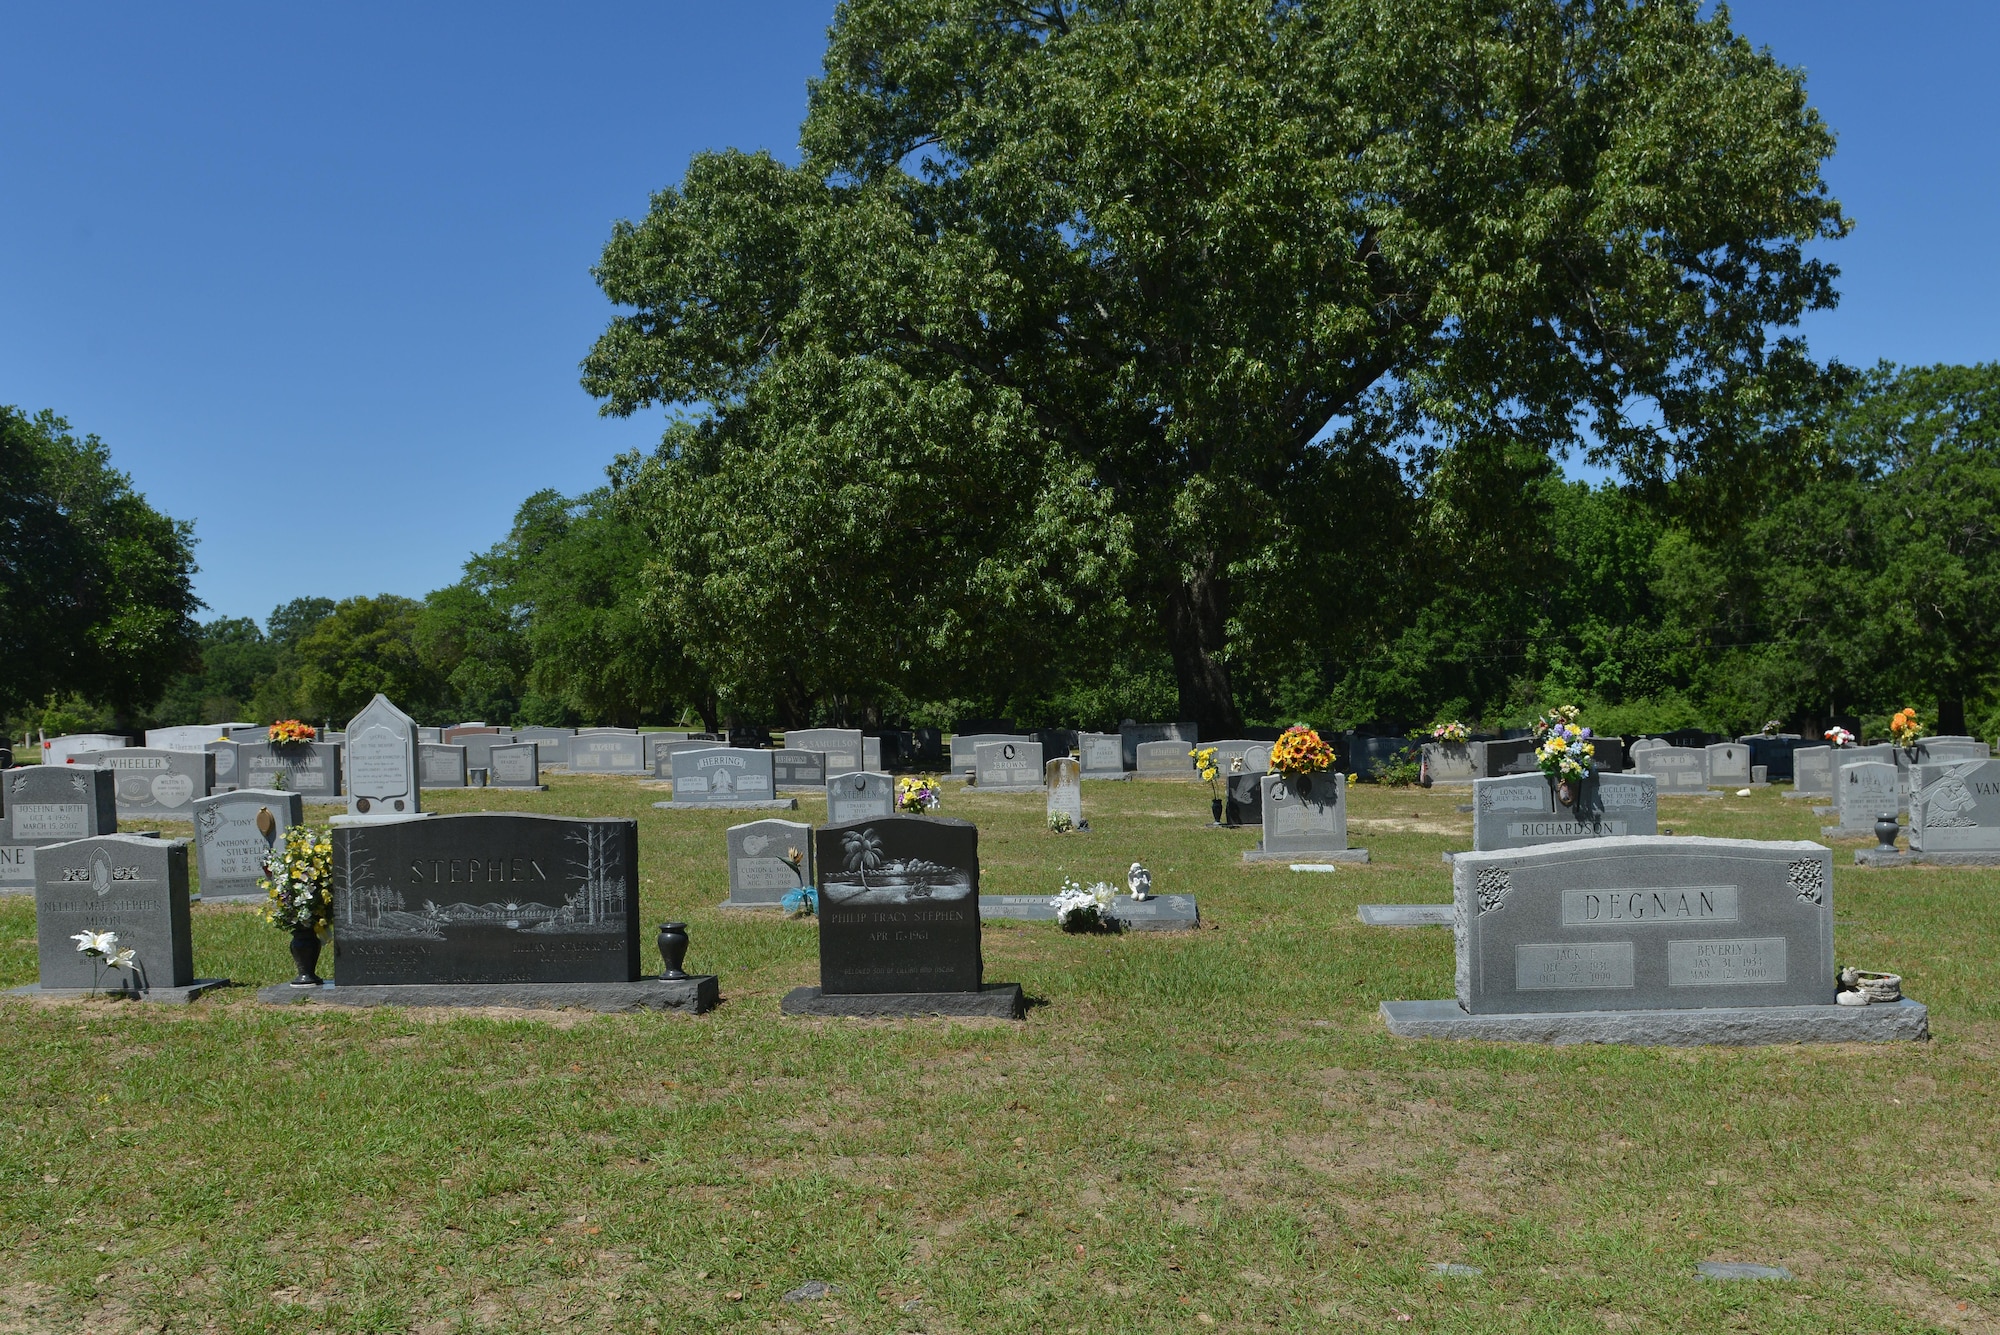 Headstones lined up at Sumter Cemetery in Sumter, S.C., May 2, 2017. The 80-acre cemetery where more than 3,300 veterans were laid to rest was established in 1830. (U.S. Air Force photo by Airman 1st Class Destinee Sweeney)